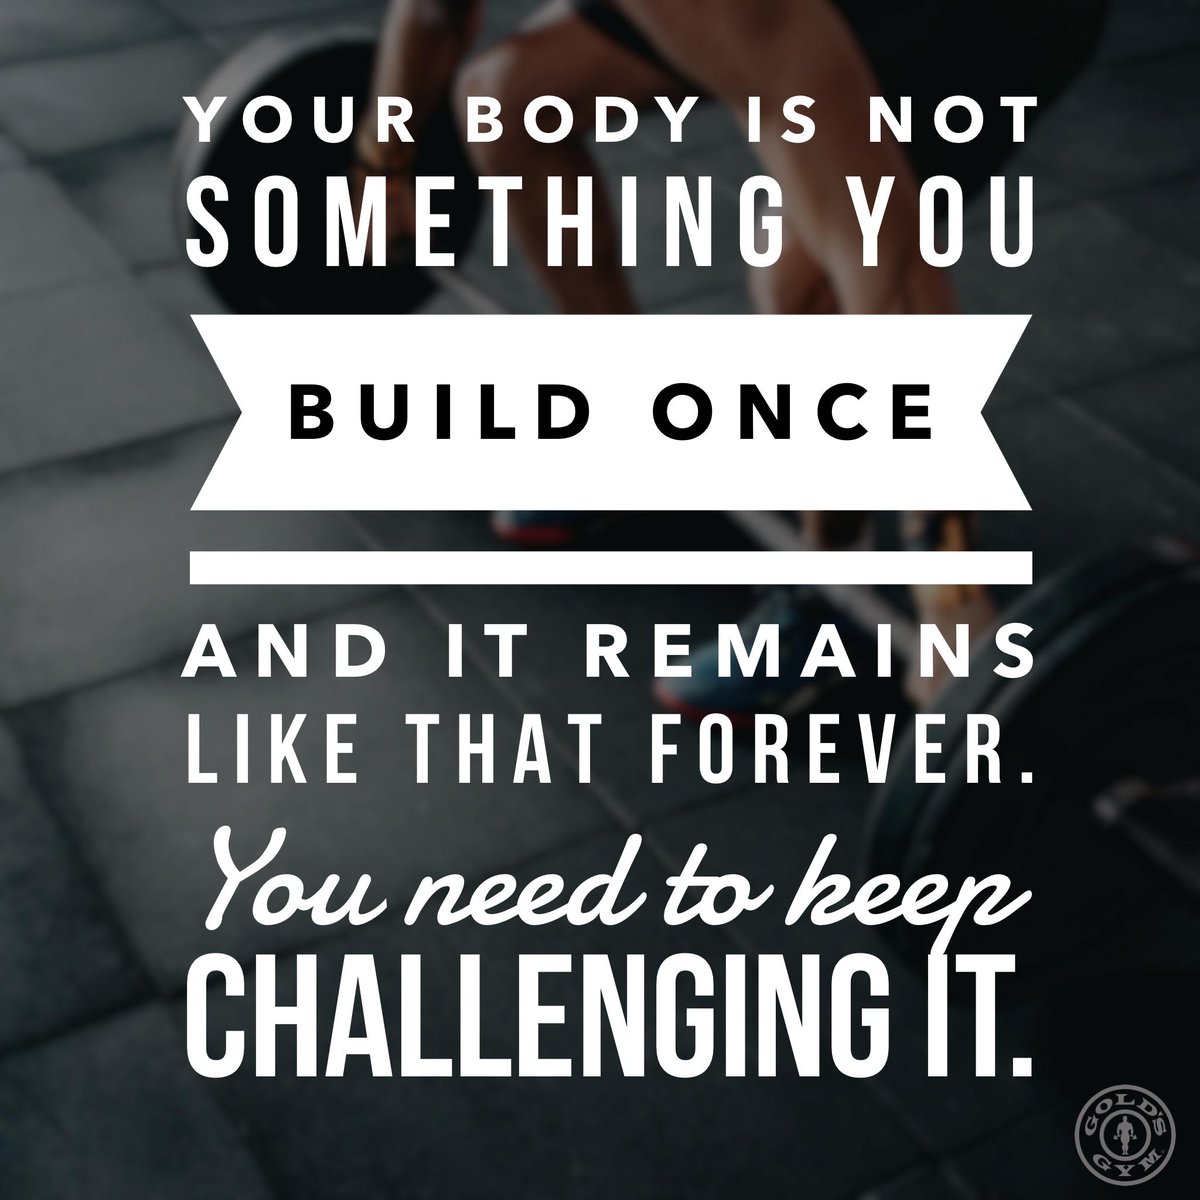 #goldsgym #buildyourbody #fitnessquotes #alwaysprogressing #gymlife #gymjunkie #fitlife #inspiration #workoutquotes #liveyourlife #bodybuilding #newchallenges #fitspo #fitspiration #gymmotivation #gymquotes #doitforyou #knowyourstrength #healthyliving #fitnesslifestyle #fitfreaks